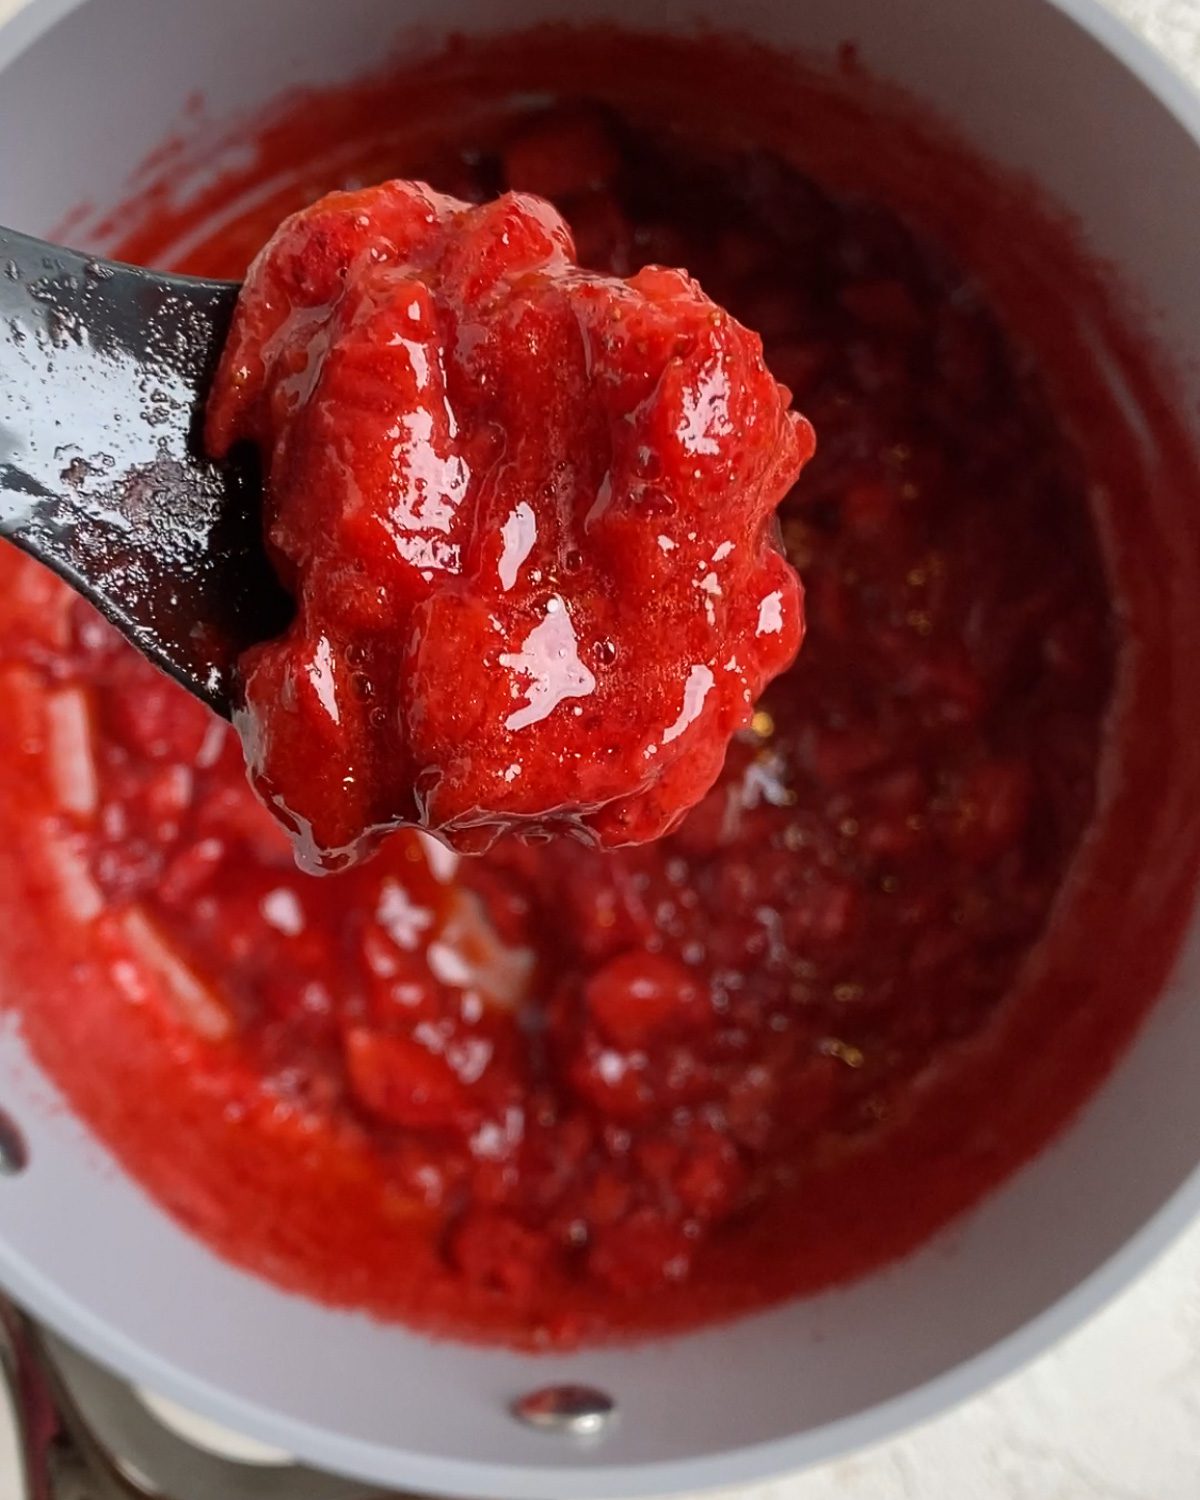 process of spooning strawberry compote in bowl